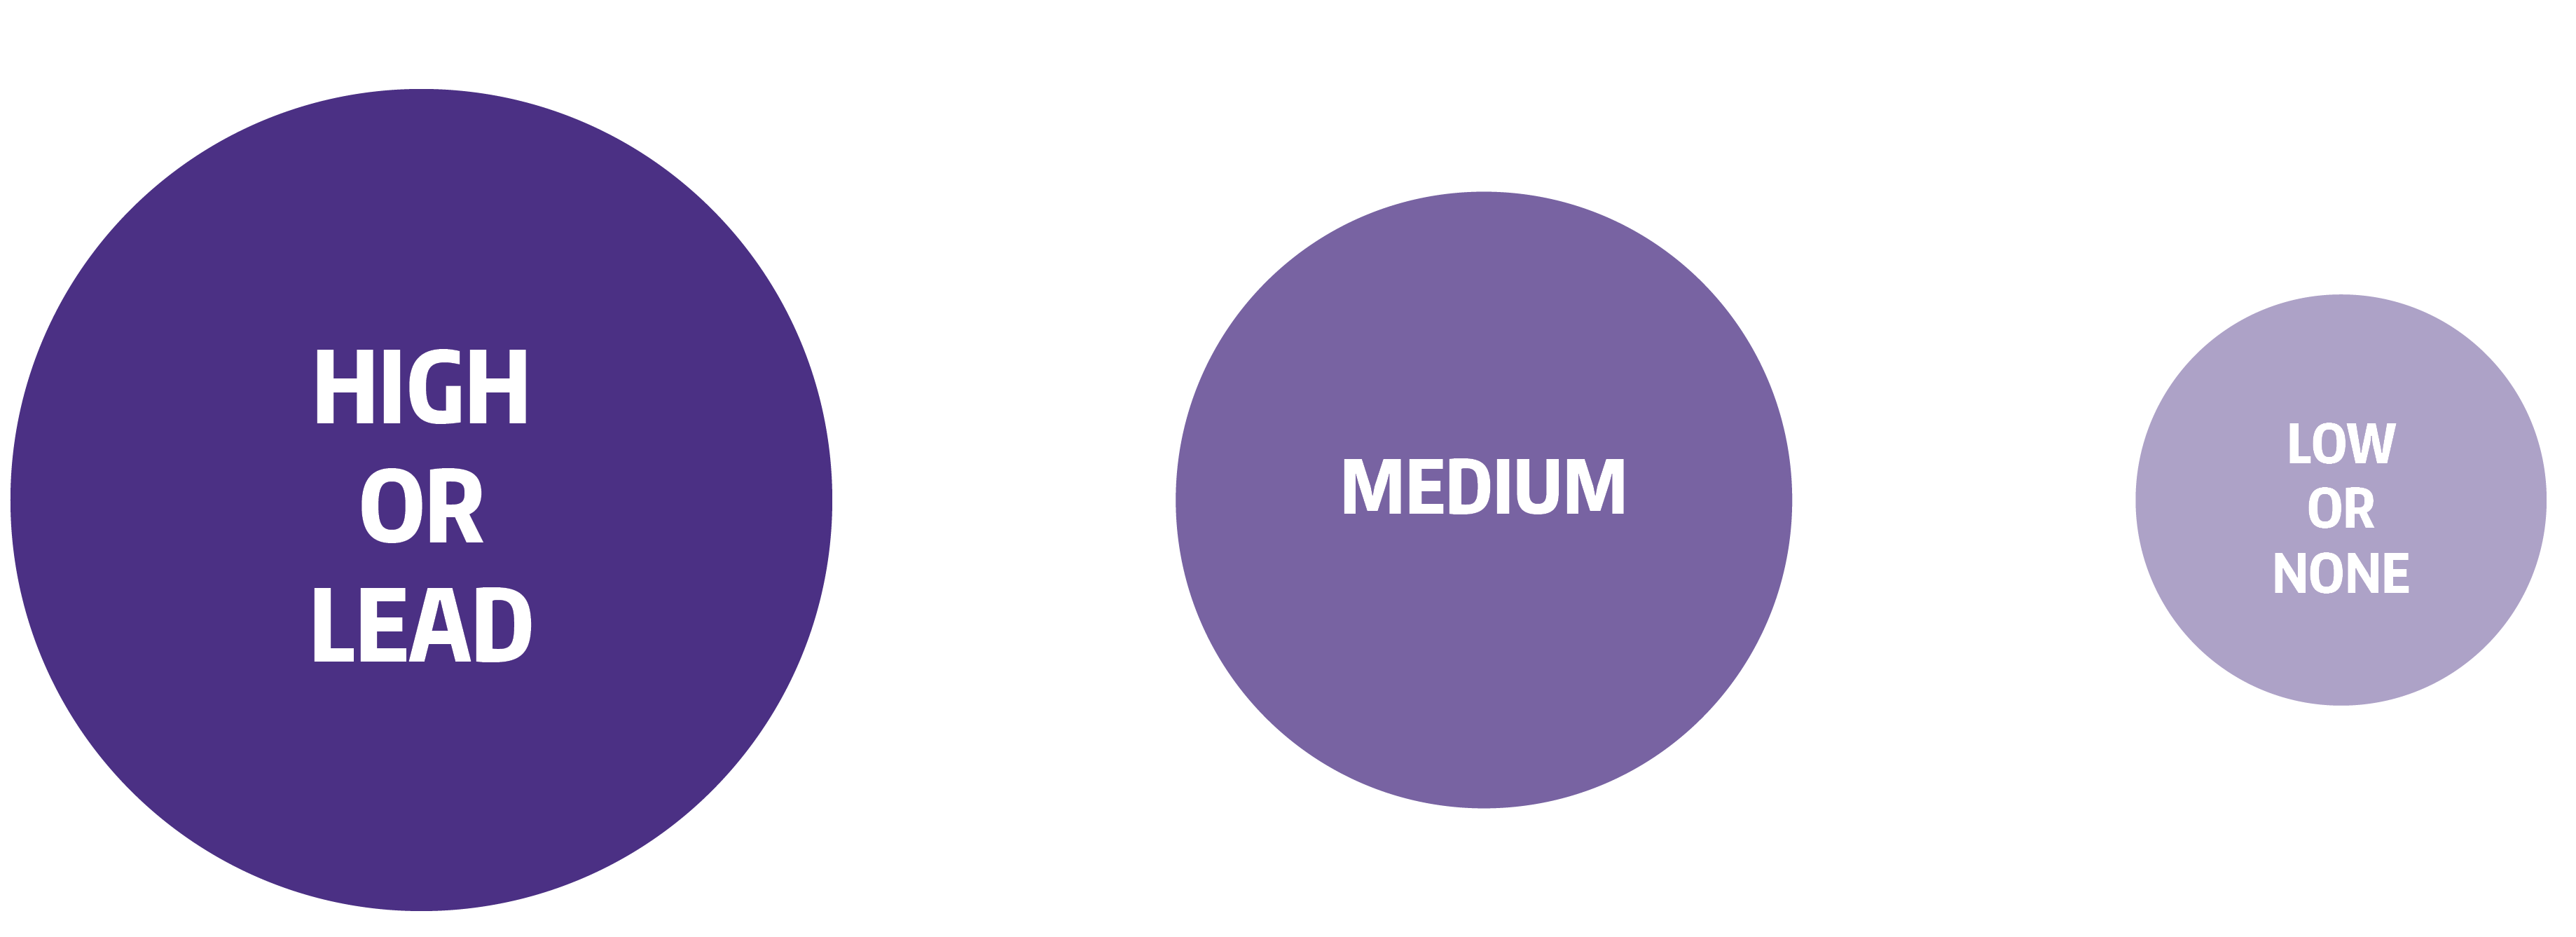 Three purple circles that get smaller and lighter in color from left to right they read High or Lead, Medium, Low or None